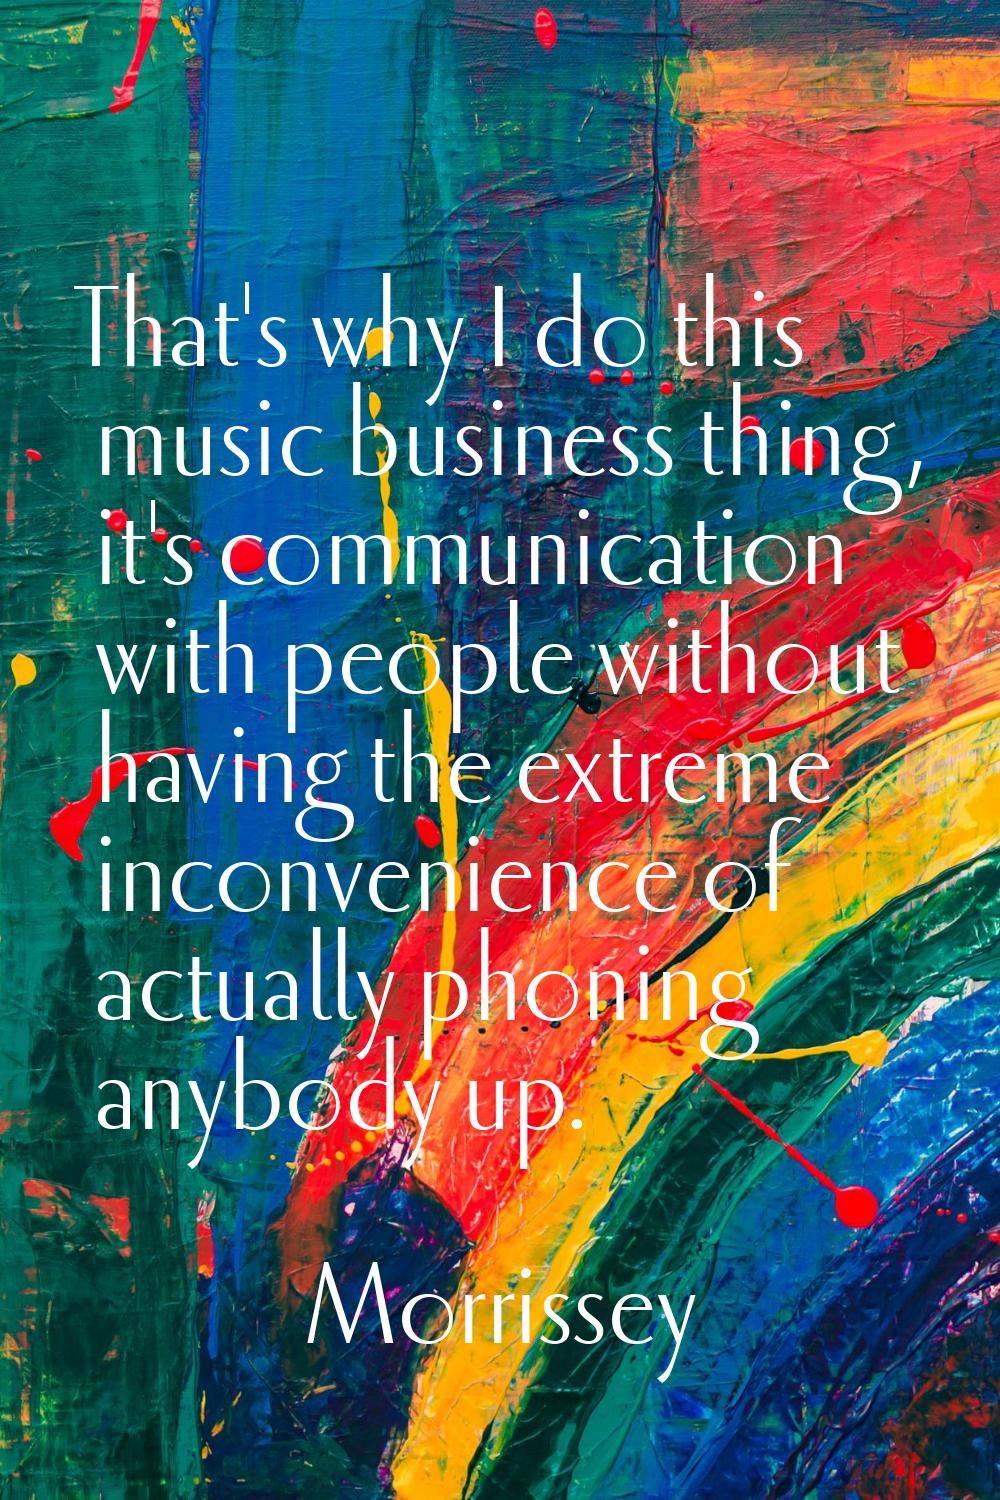 That's why I do this music business thing, it's communication with people without having the extrem